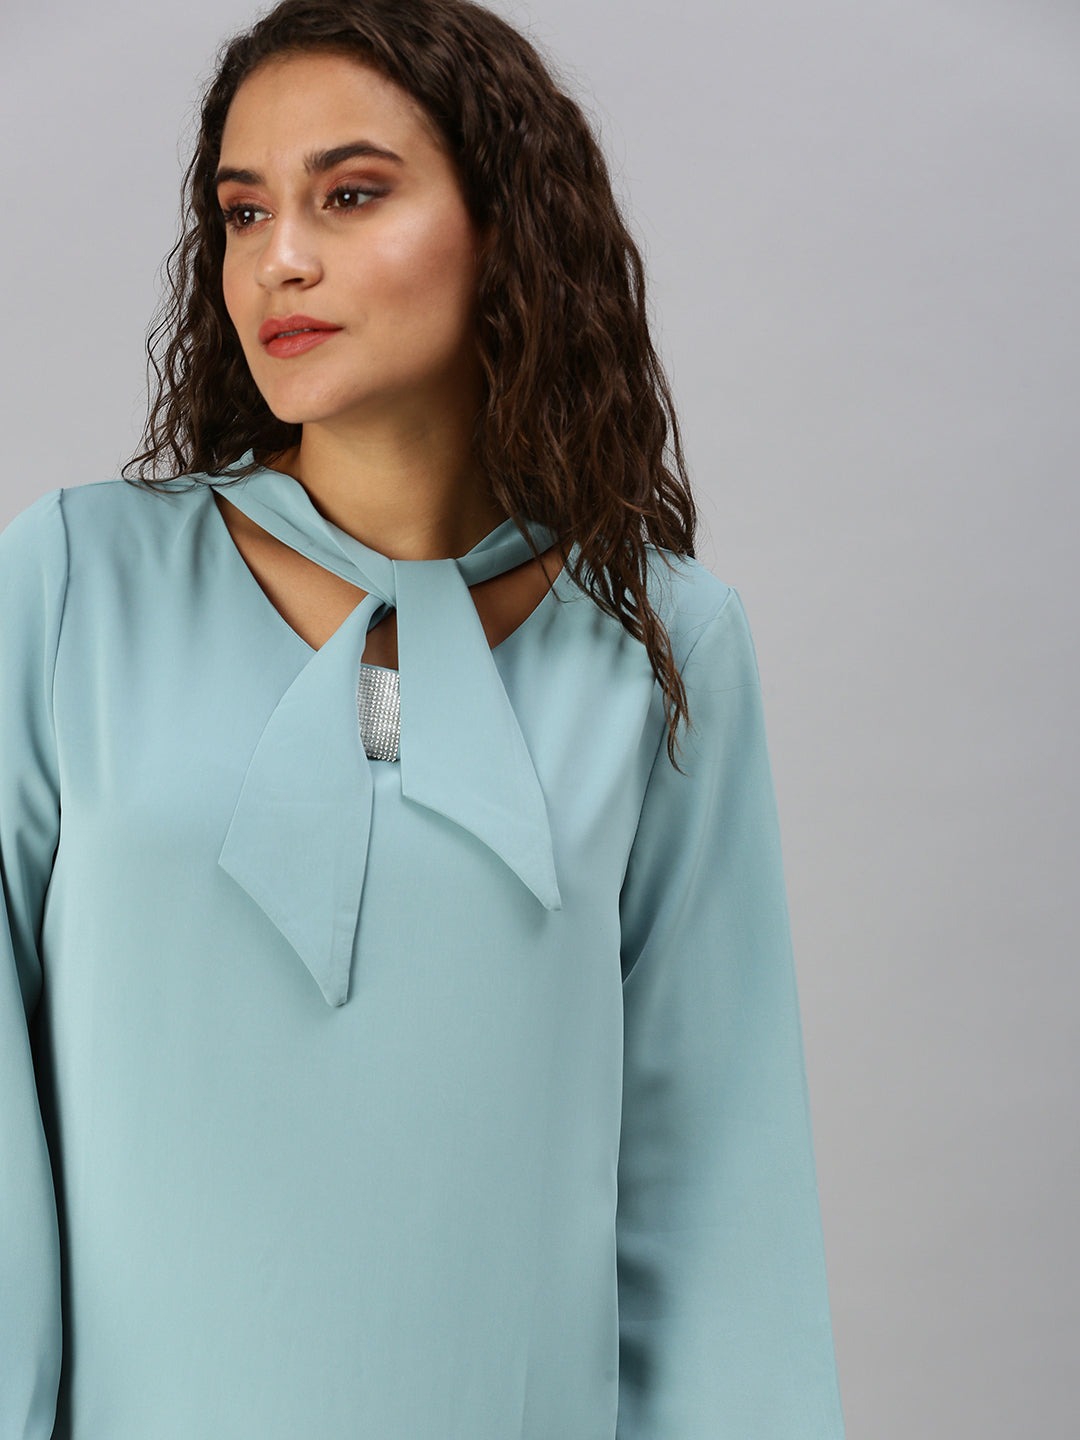 Women Tie-Up Neck Solid Turquoise Blue Top